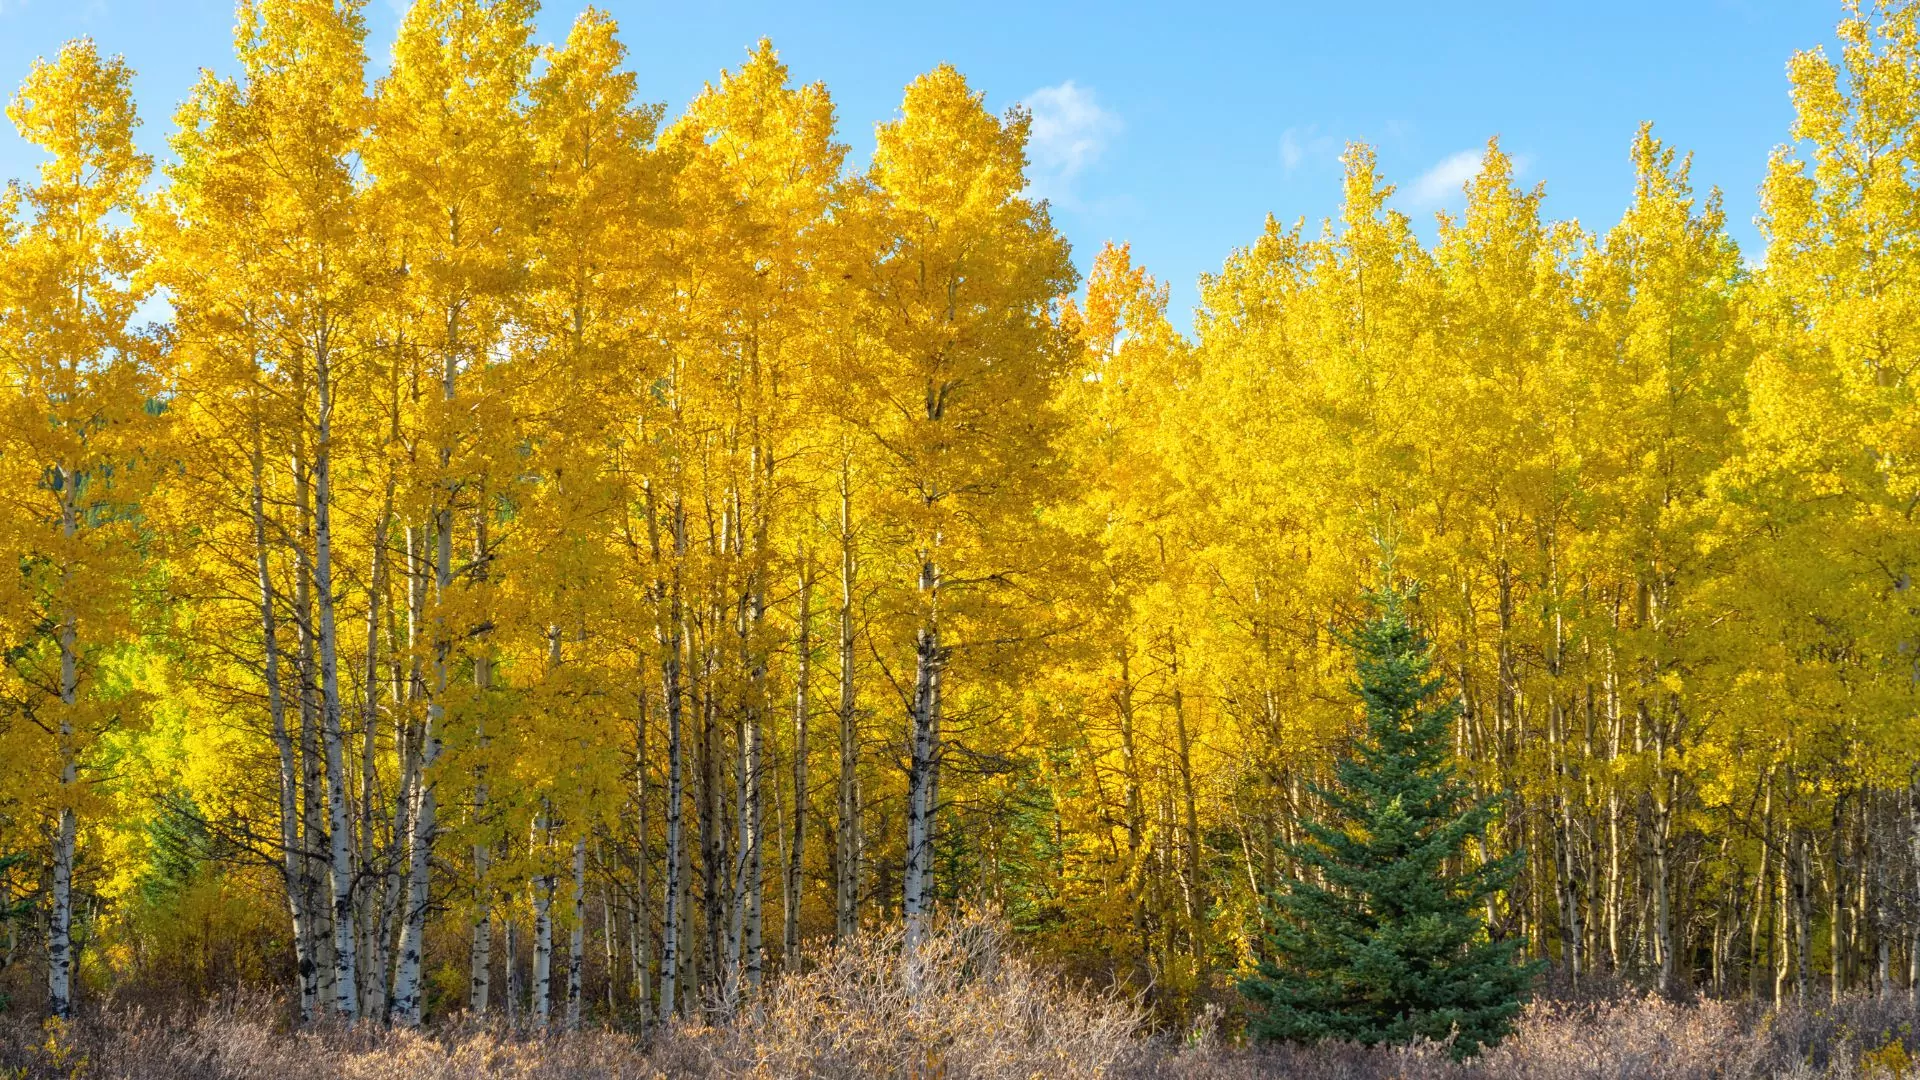 A stand of tall yellow larch trees occupy most of the image with a small slice of blue sky behind